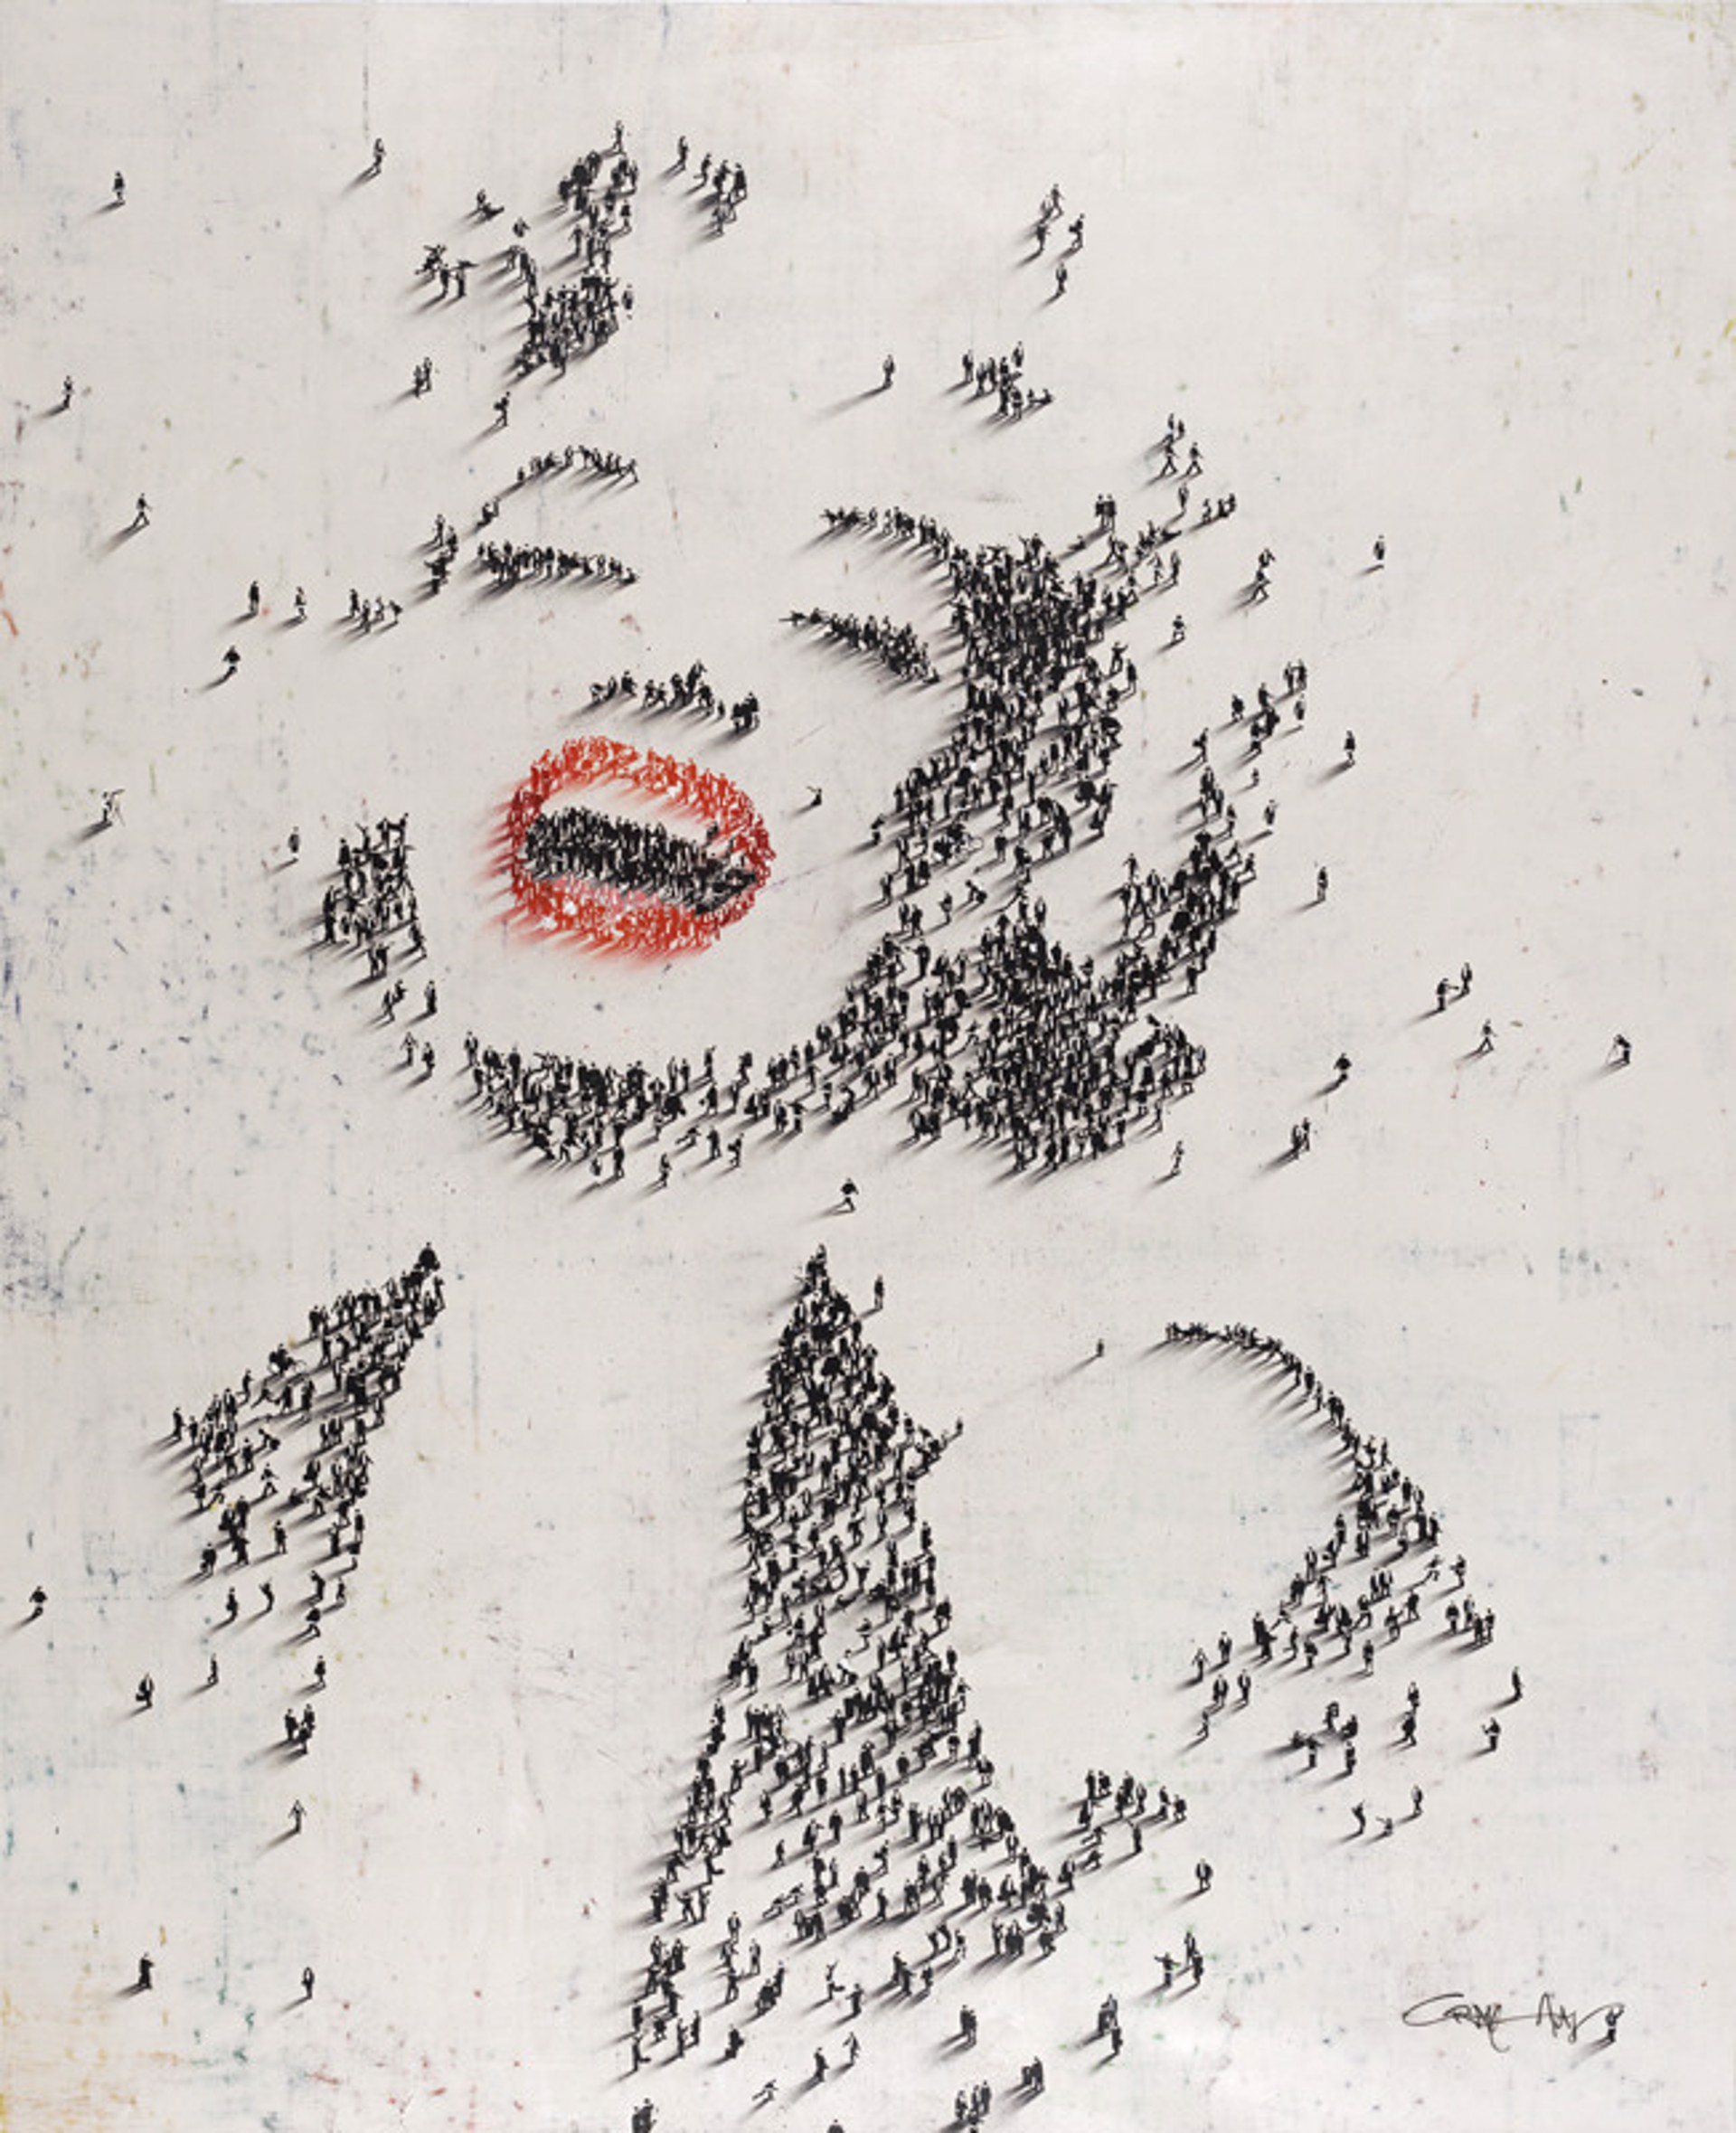 sold-MARILYN-LAUGHIN by Craig Alan